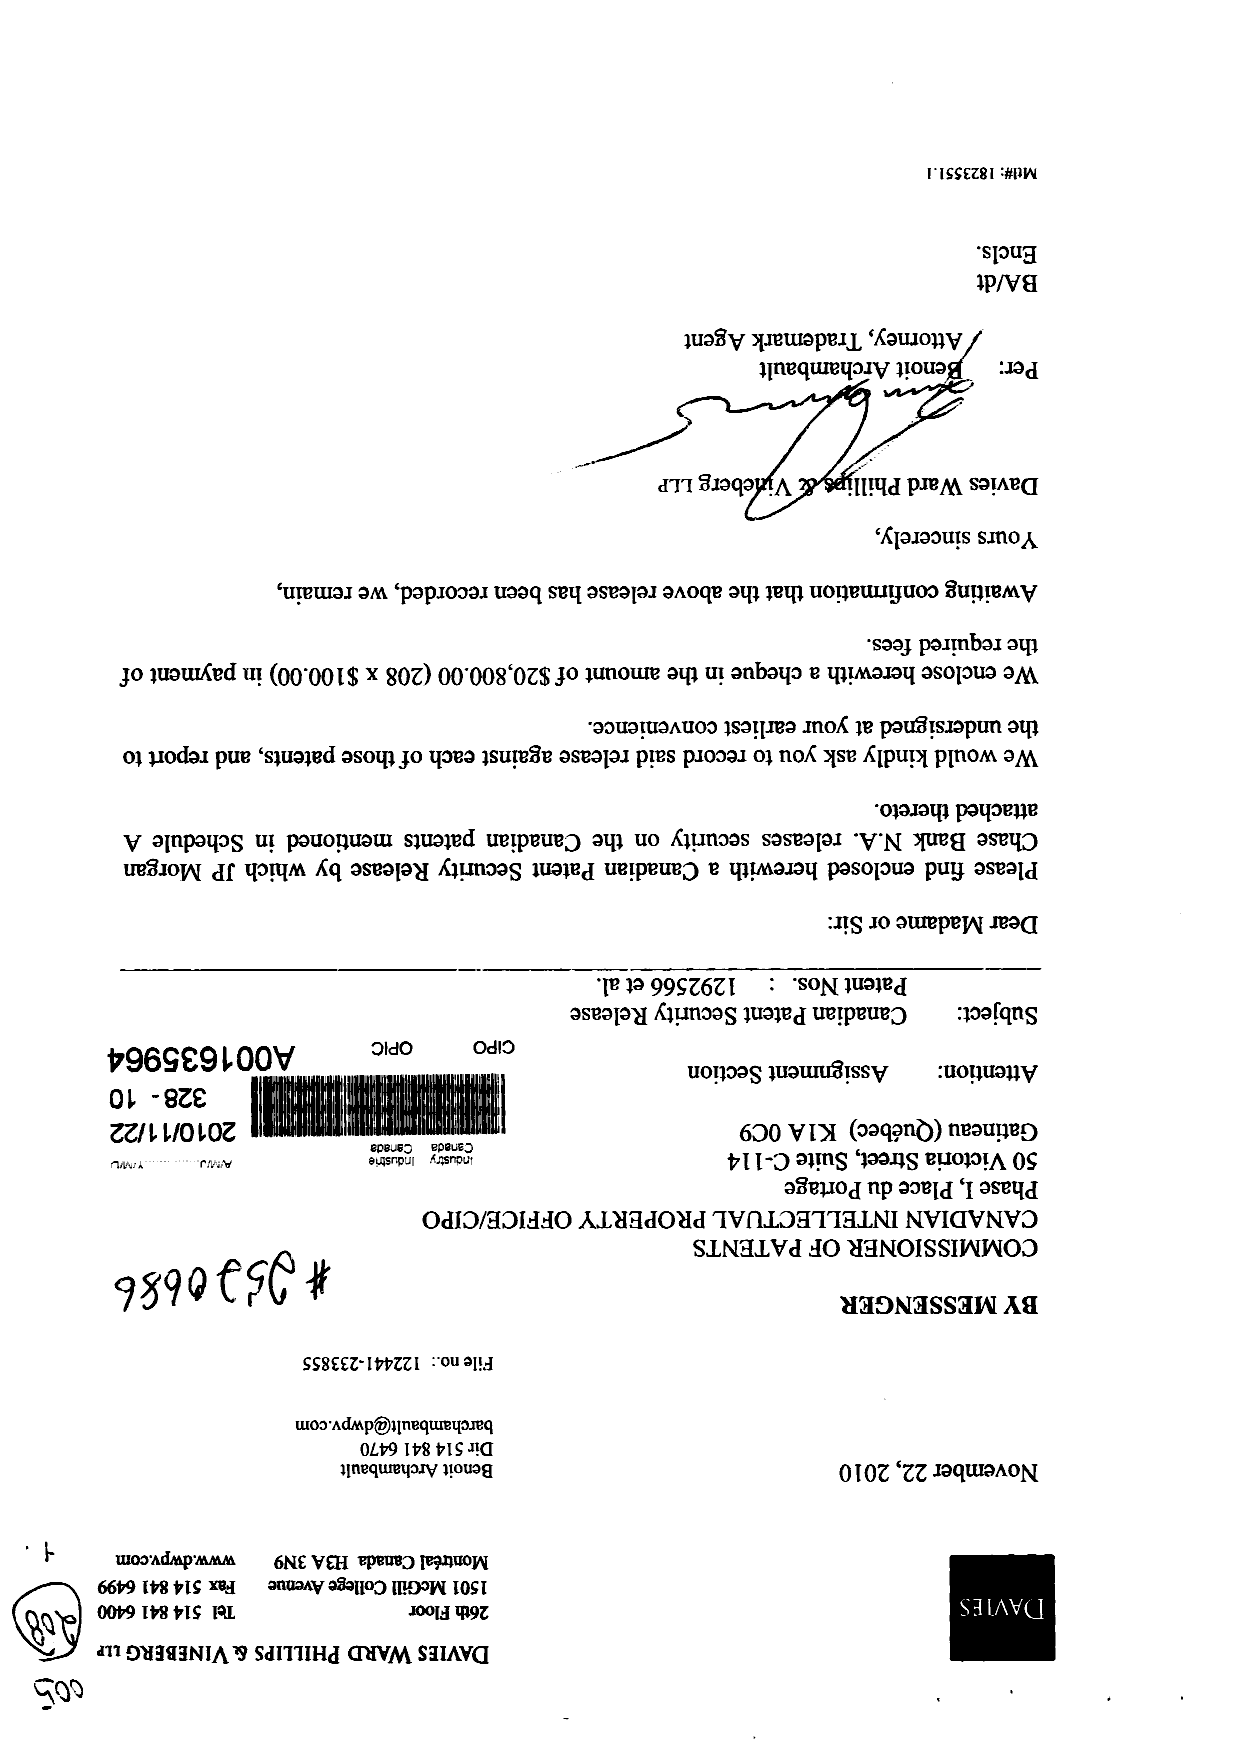 Canadian Patent Document 2374730. Assignment 20091222. Image 1 of 17